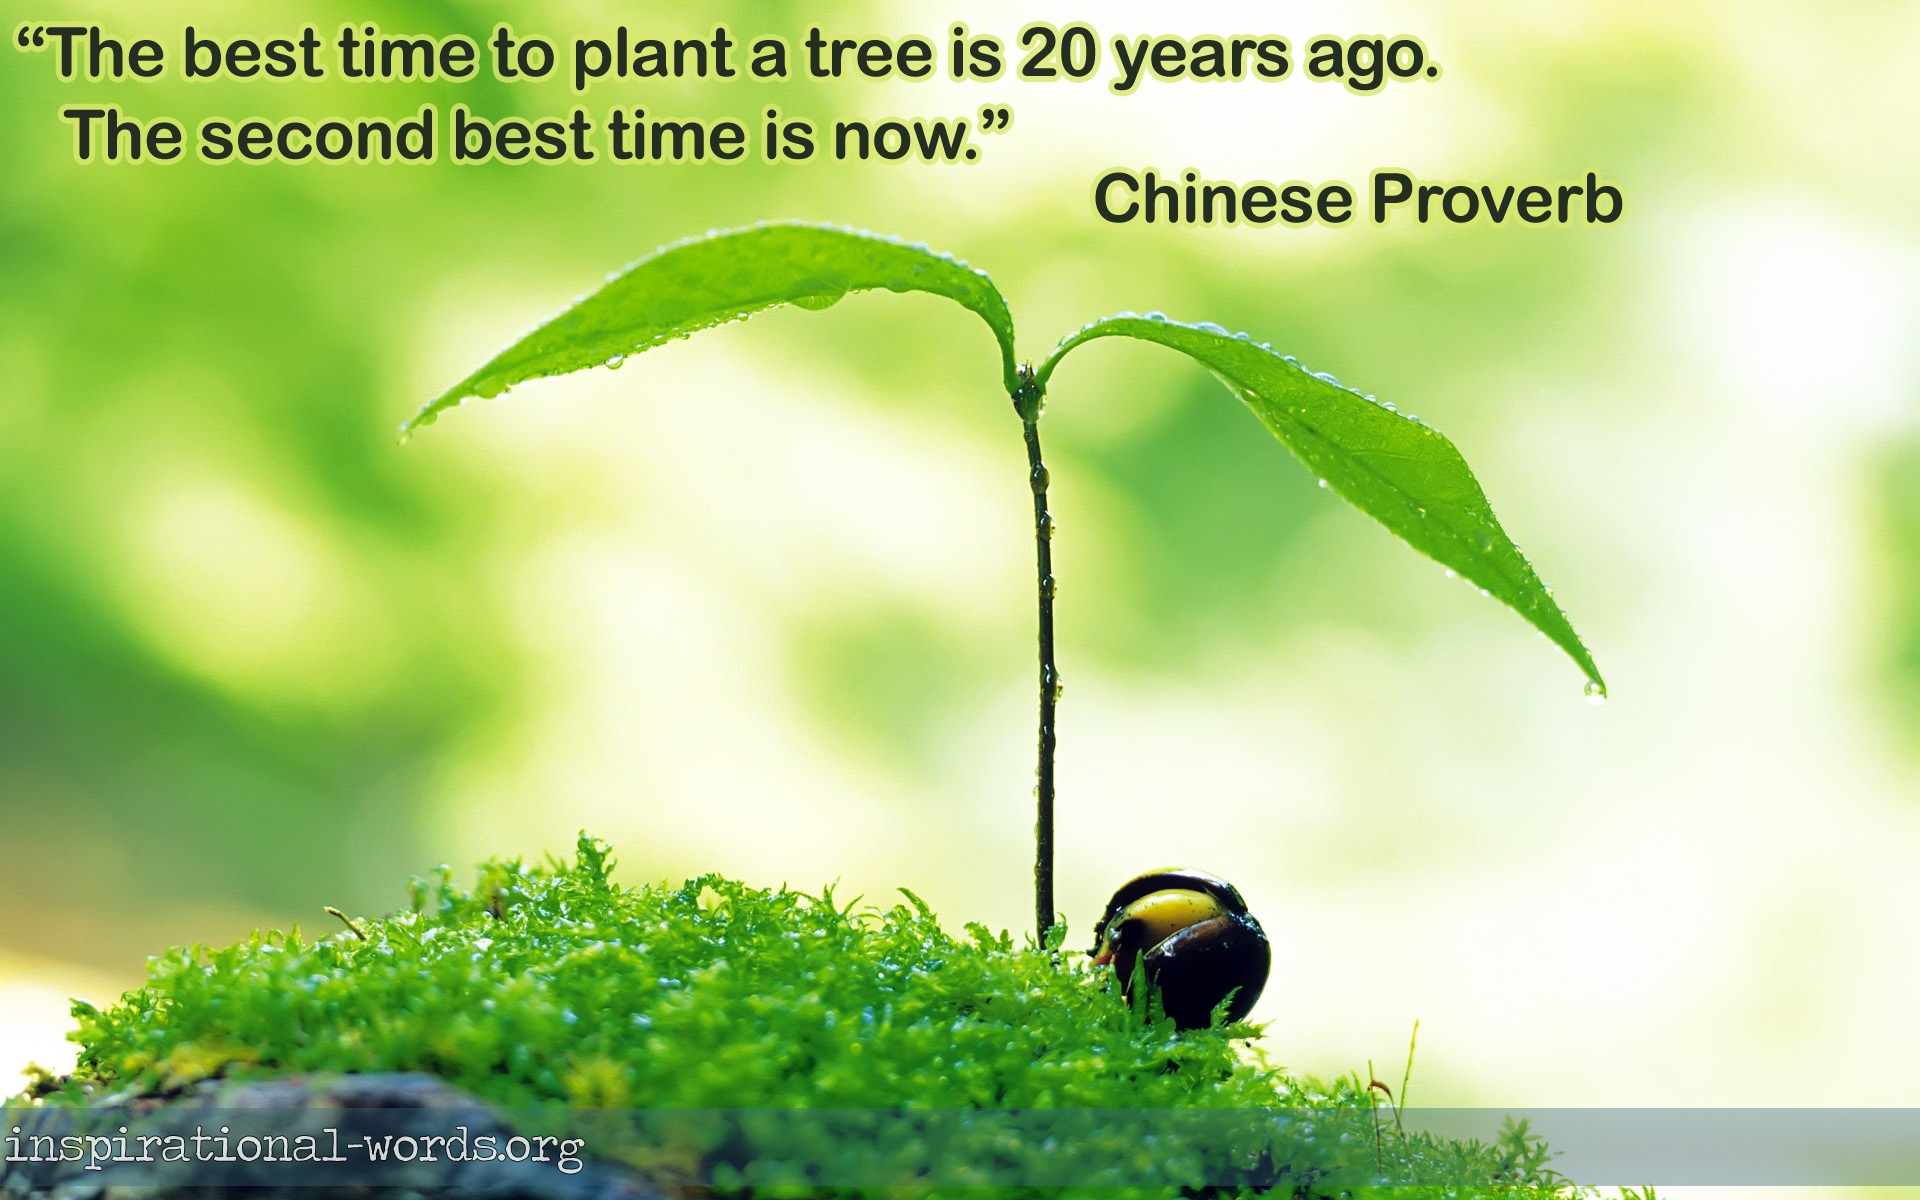  Growing Plants Quotes in the world Learn more here 